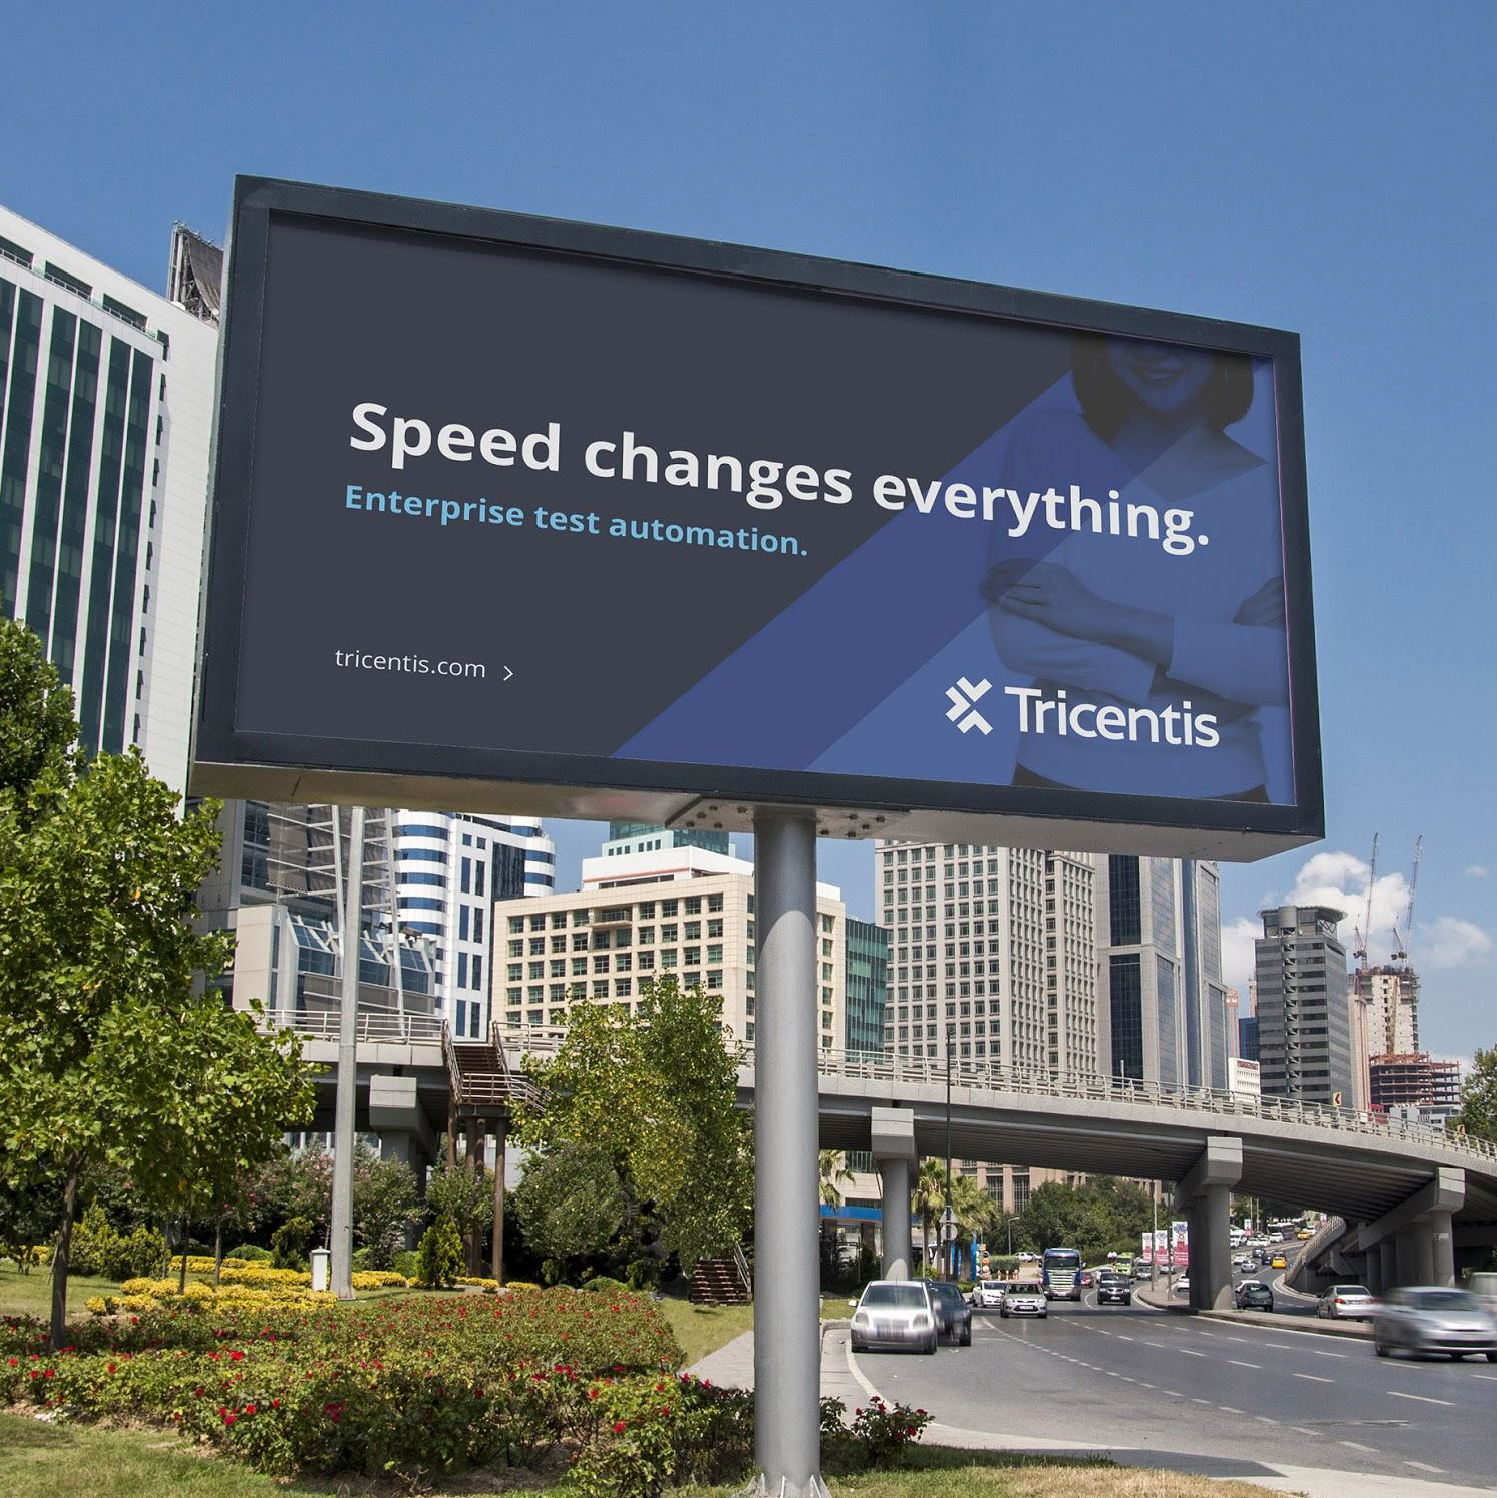 A billboard advert reading "Speed changes everything. Enterprise test automation" 